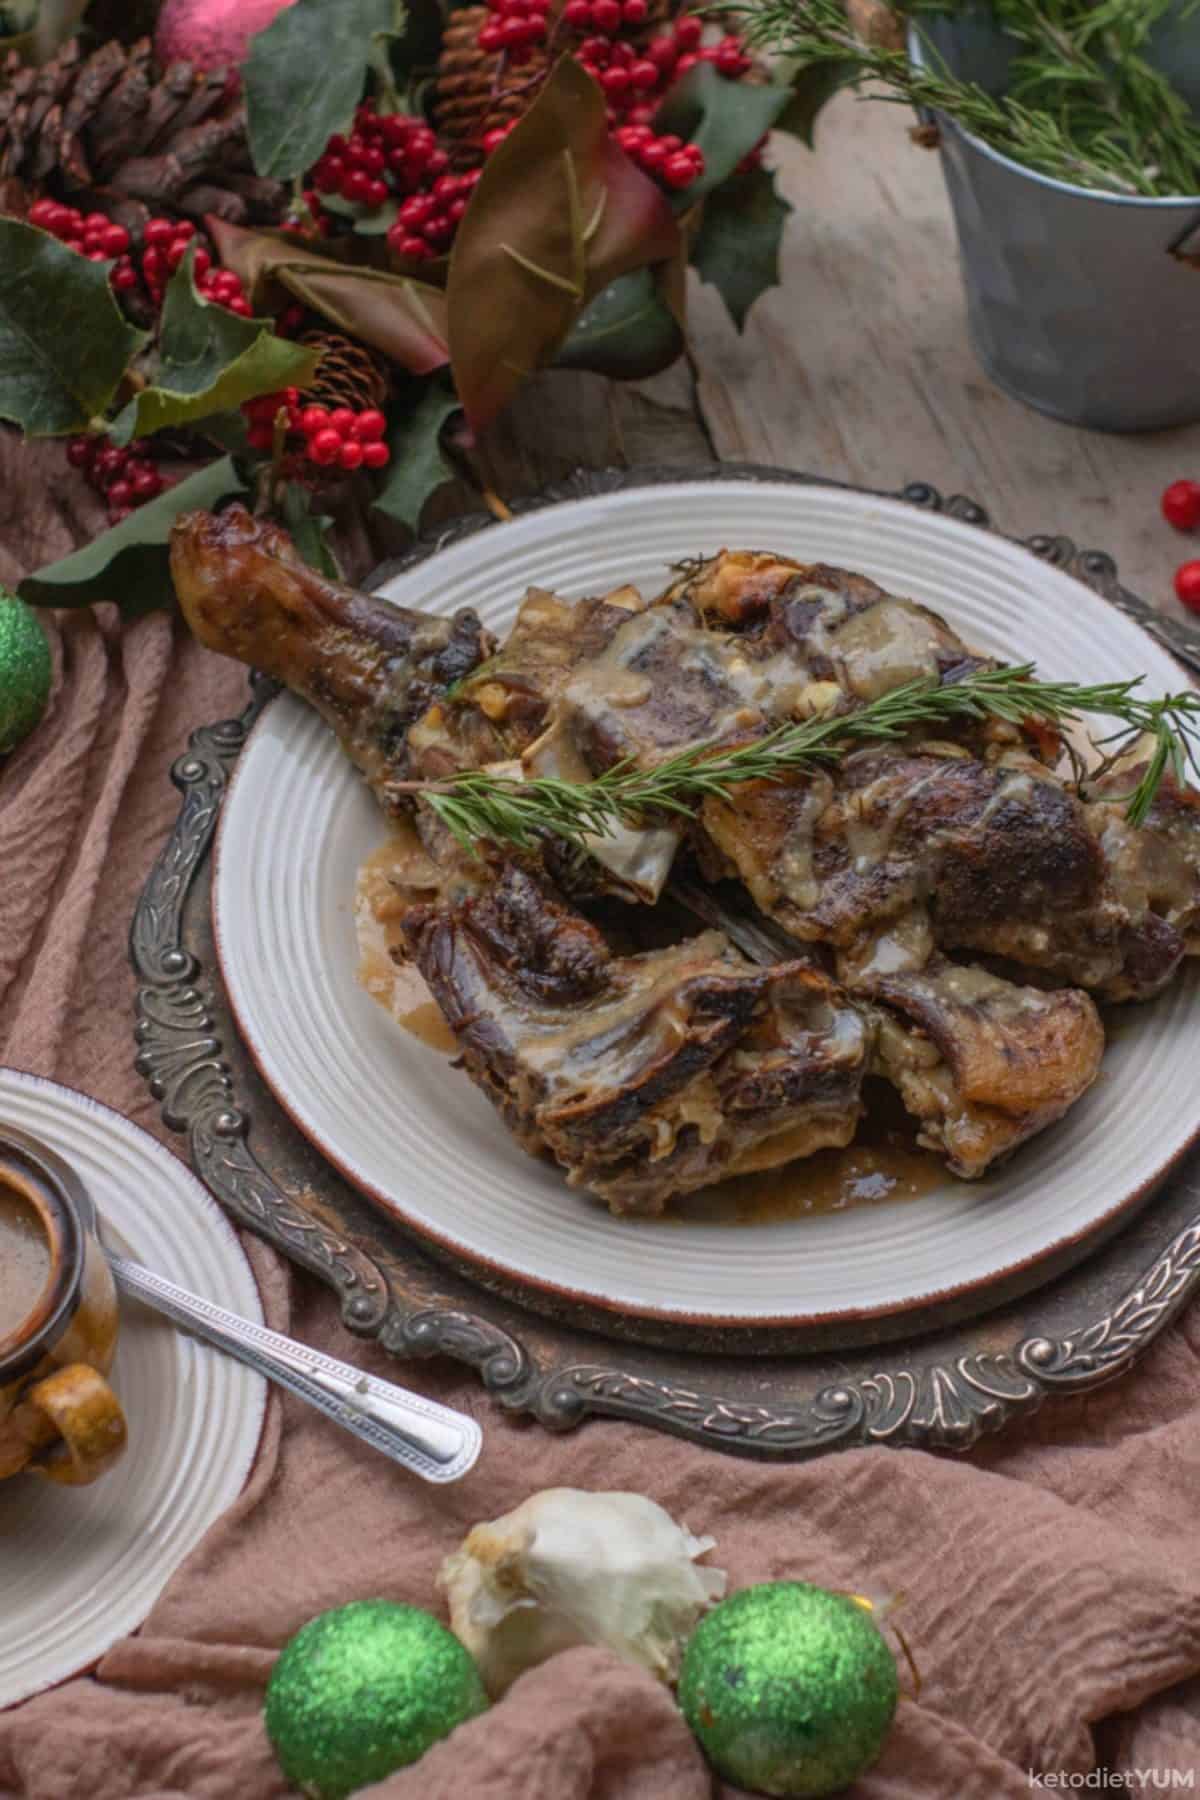 Low carb roast leg of lamb on a festively decorated table ready to eat